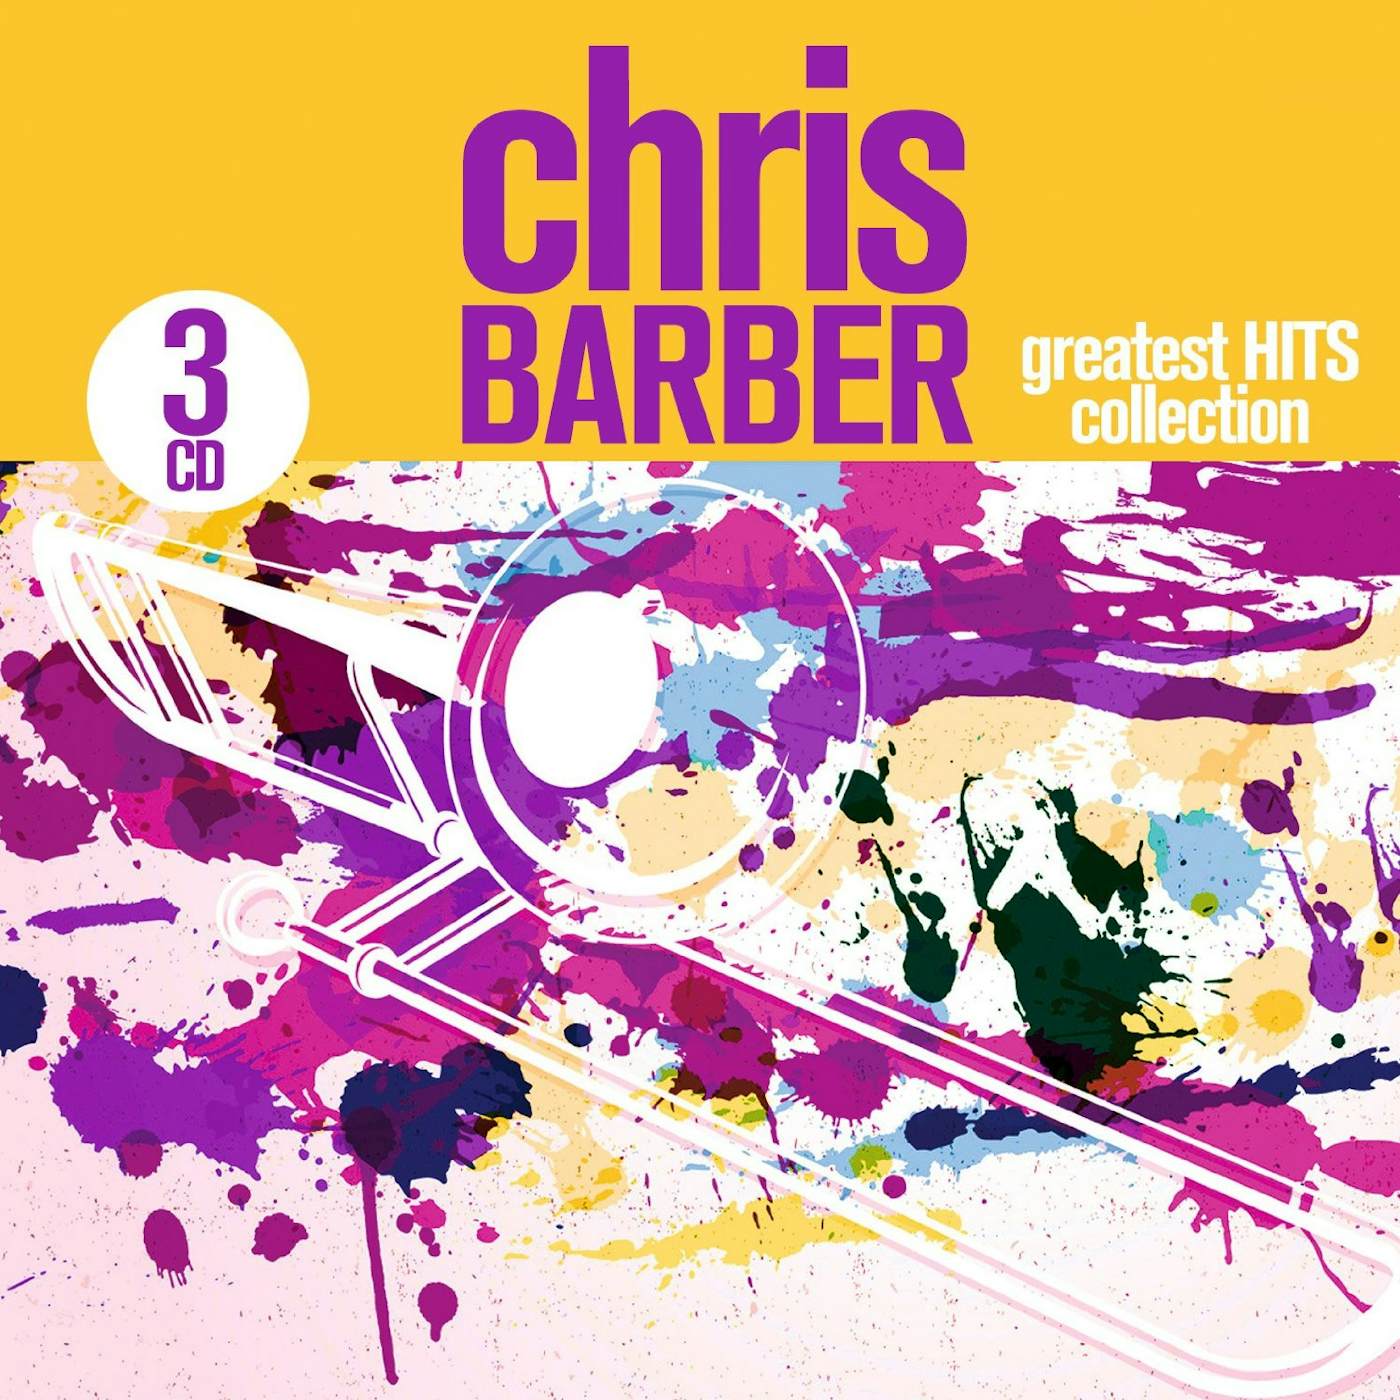 Chris Barber GREATEST HITS COLLECTION CD